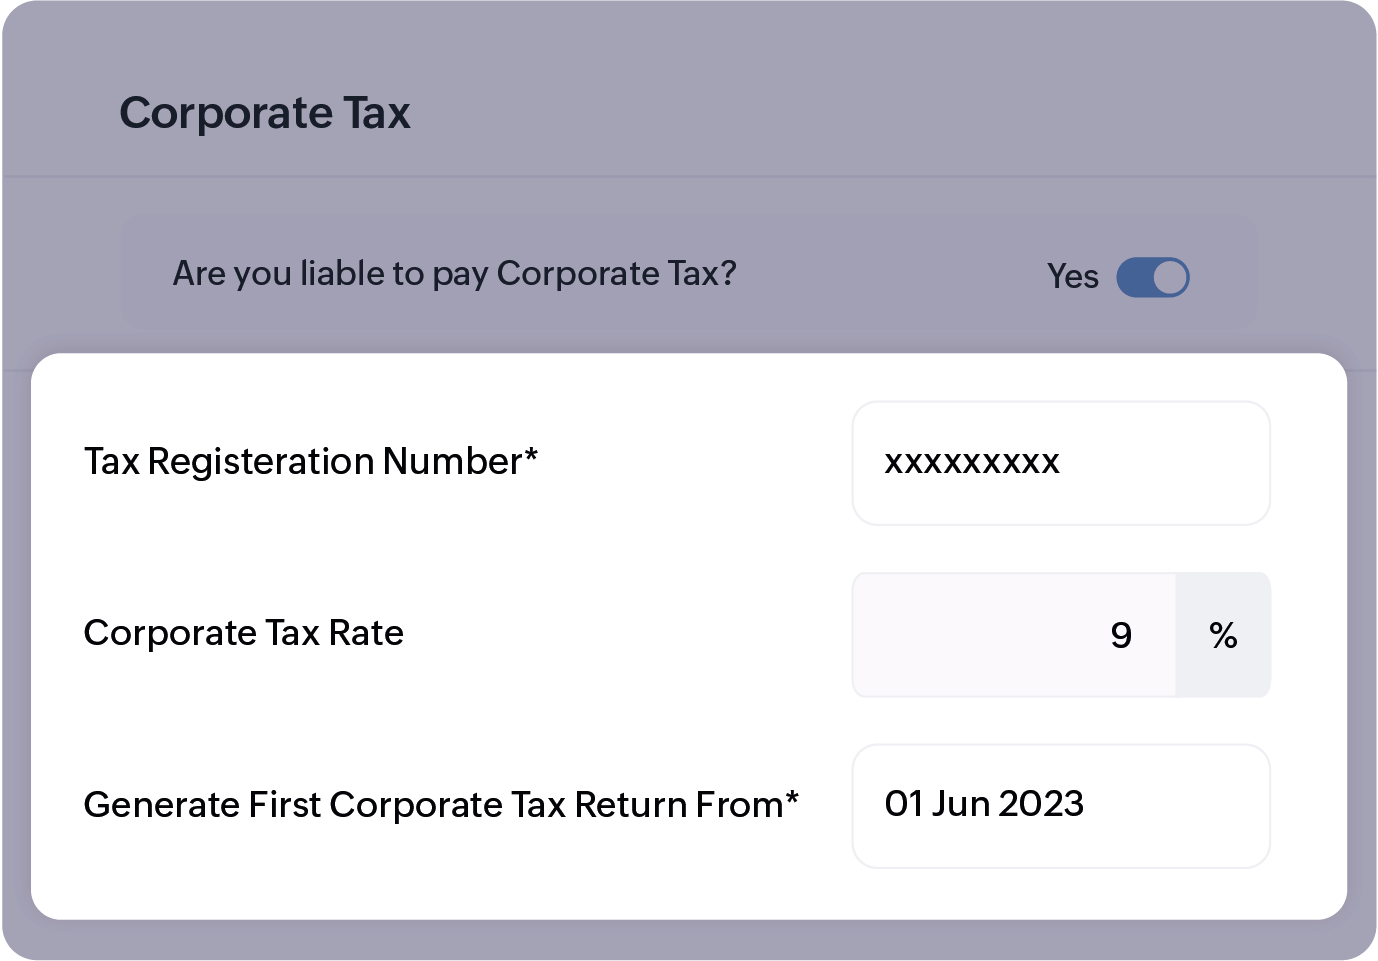 Enter the tax registration number to generate the UAE Corporate tax report